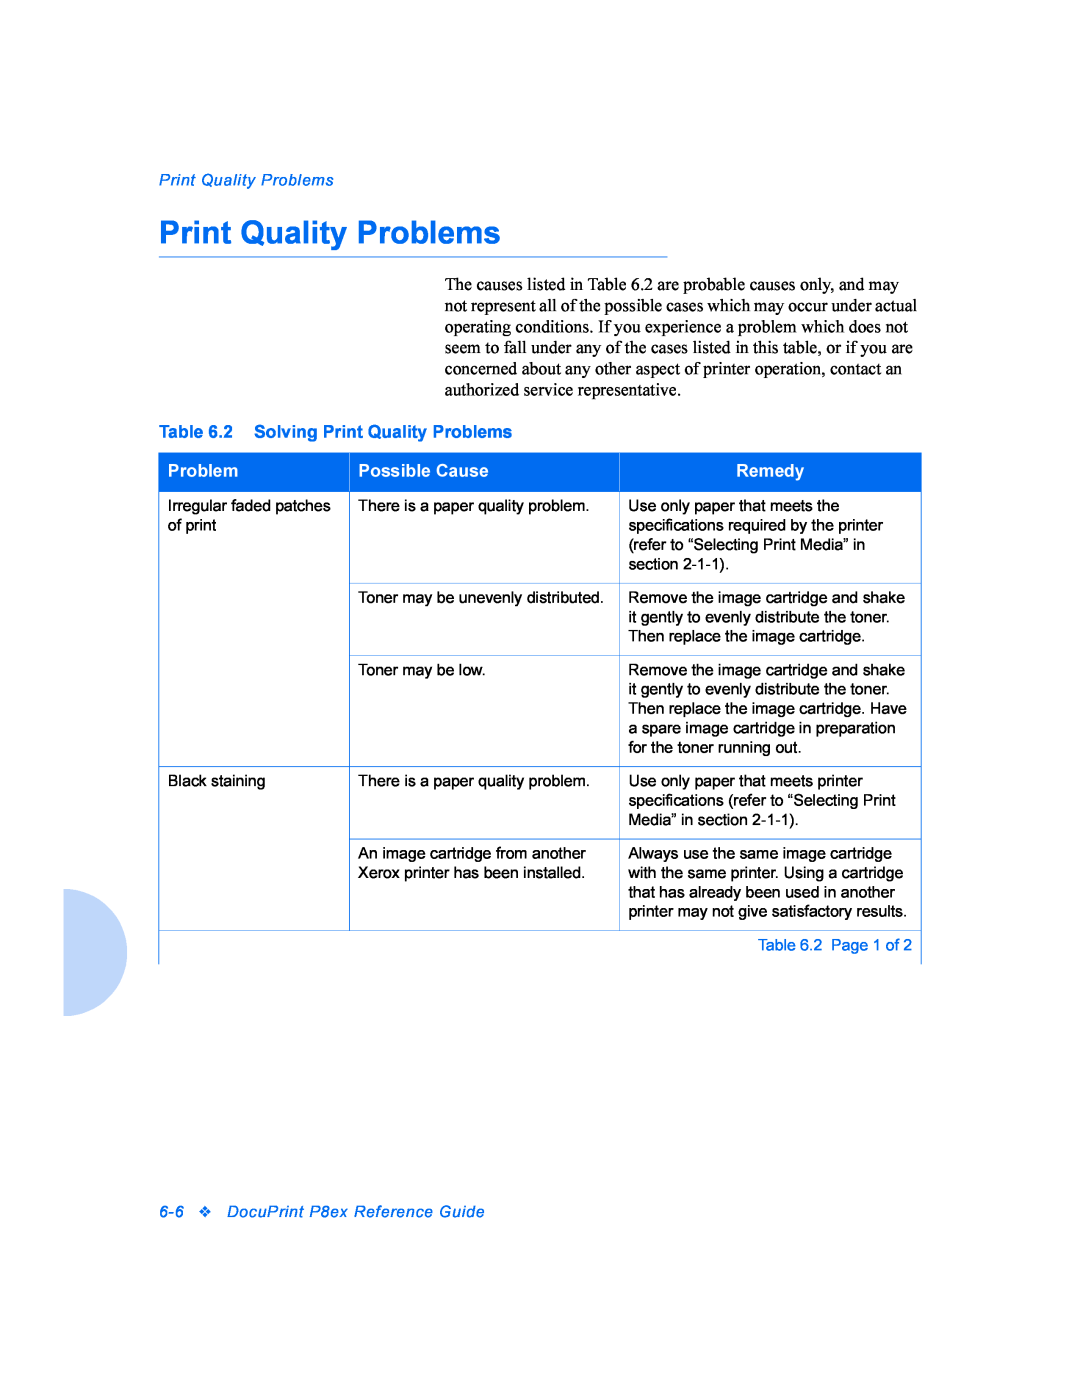 Xerox manual 2 Solving Print Quality Problems, Possible Cause, Remedy, 6-6DocuPrint P8ex Reference Guide 